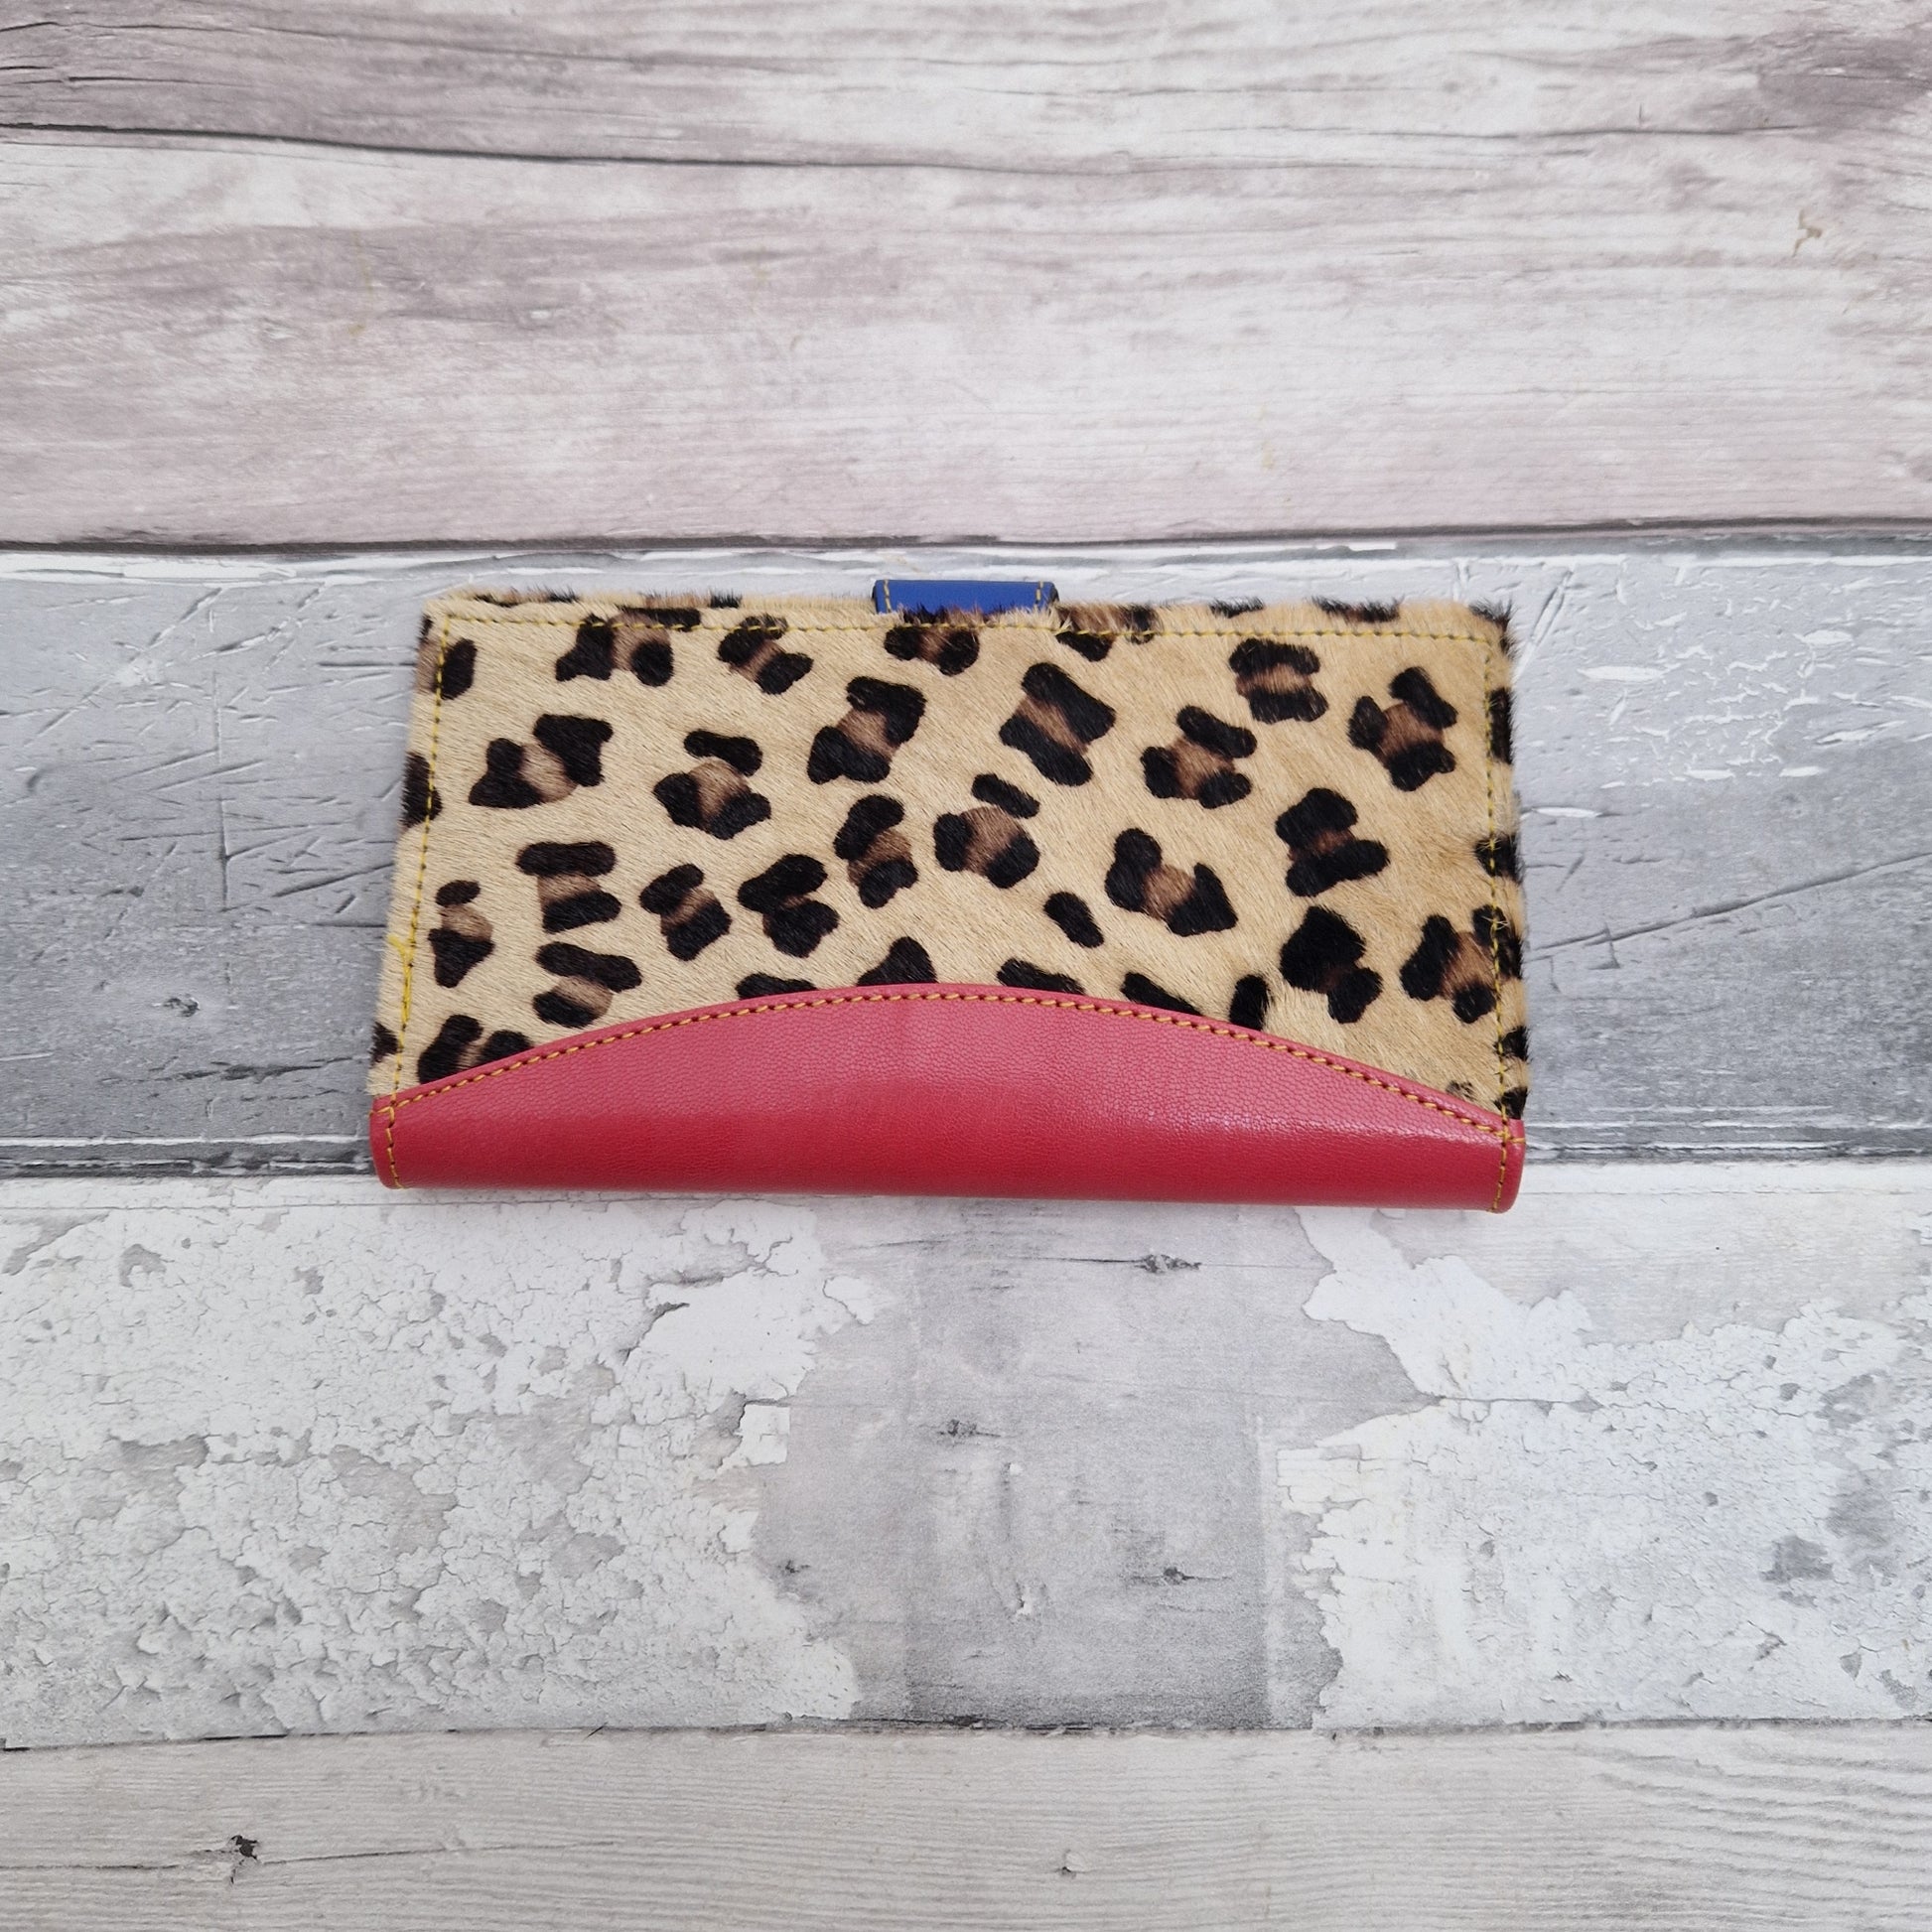 Pink Leather purse with textured leopard print covering.